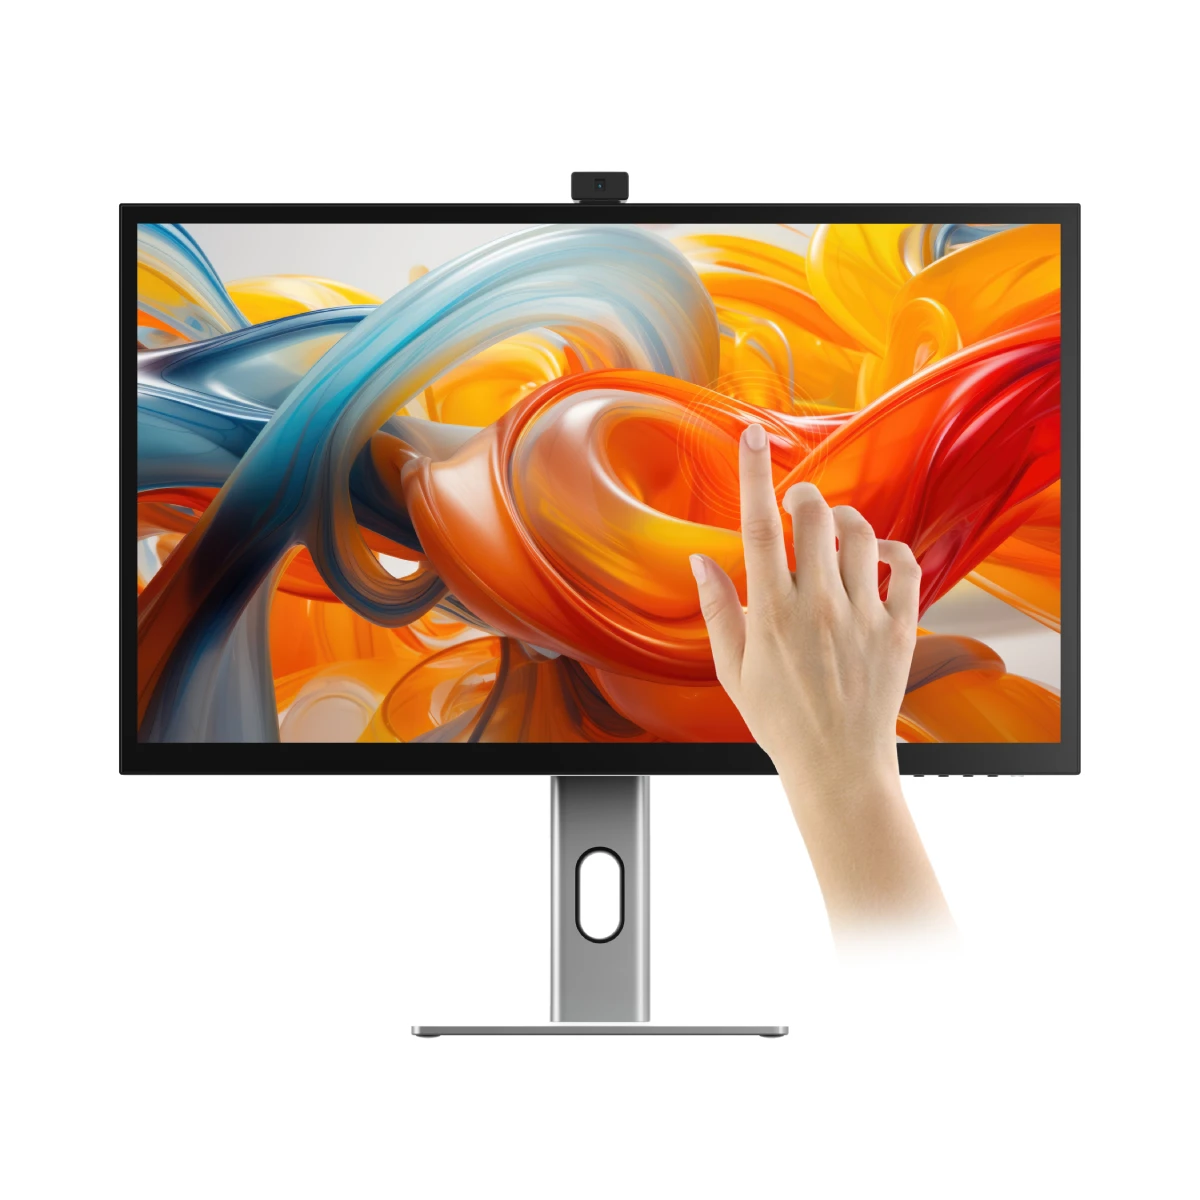 clarity-pro-touch-27-uhd-4k-monitor-with-65w-pd-webcam-and-touchscreen-pack-of-22